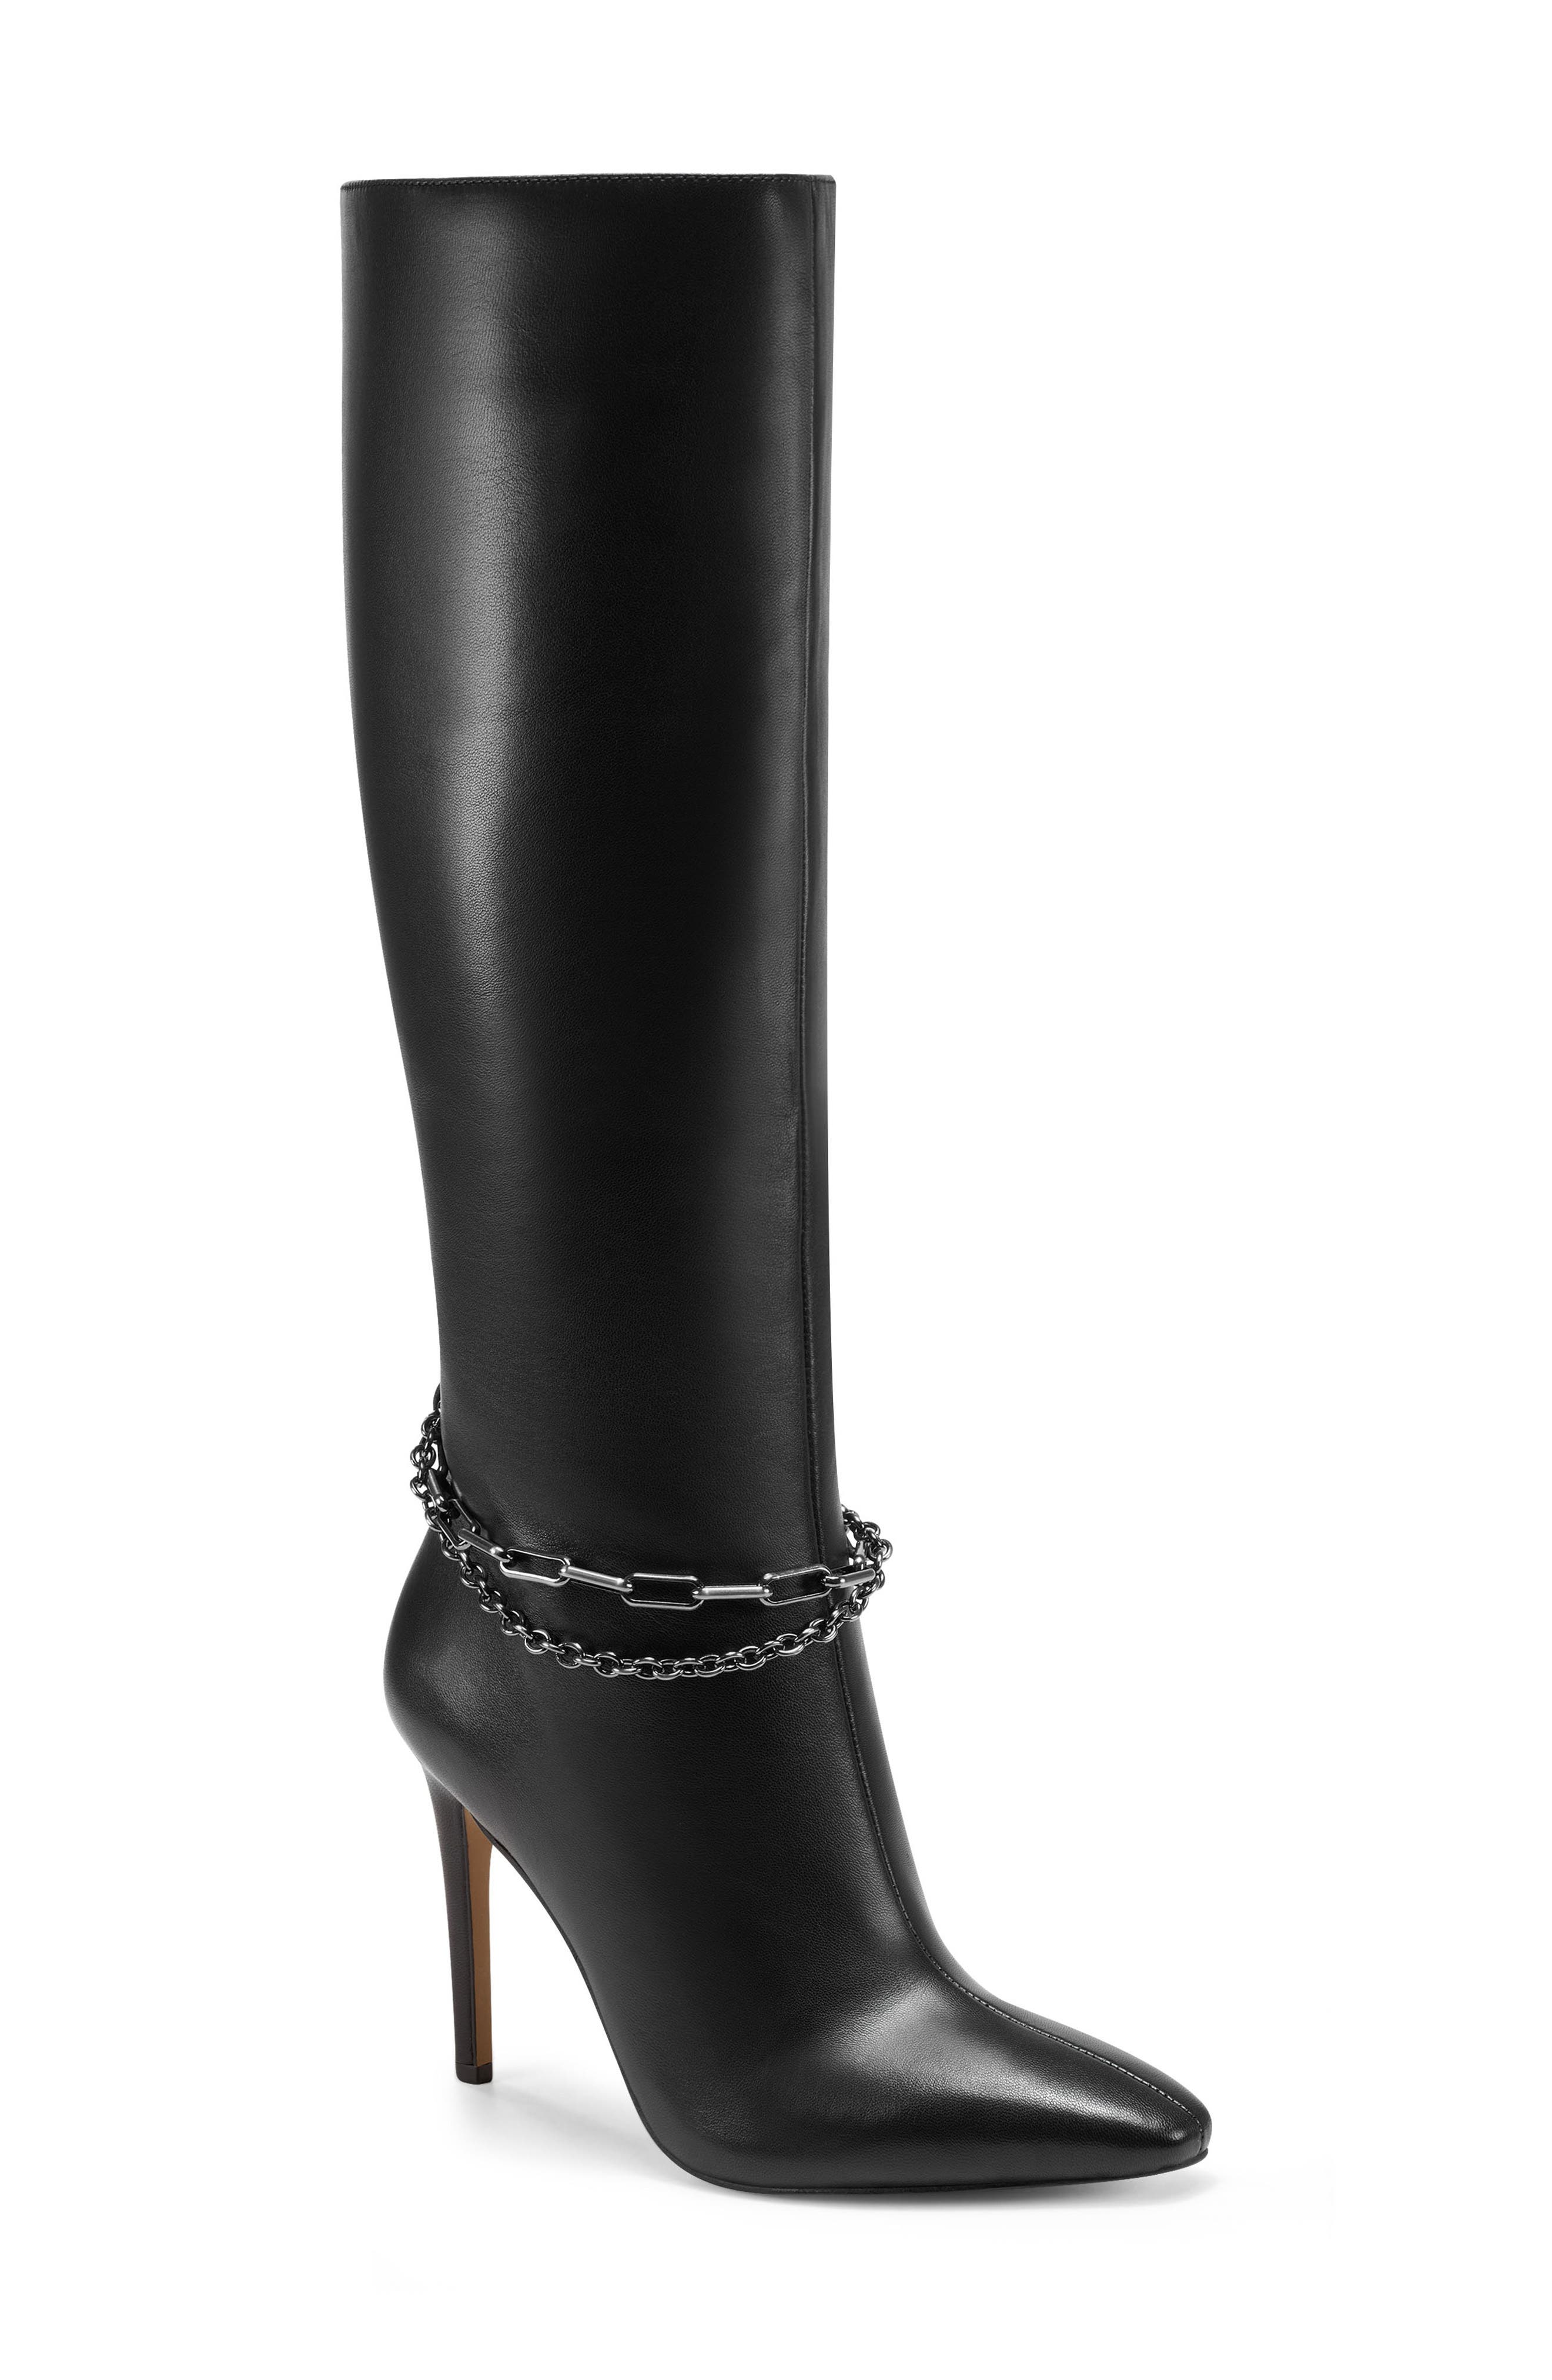 UPC 191707144163 product image for Vince Camuto Felinda Boot in Black at Nordstrom, Size 7 | upcitemdb.com